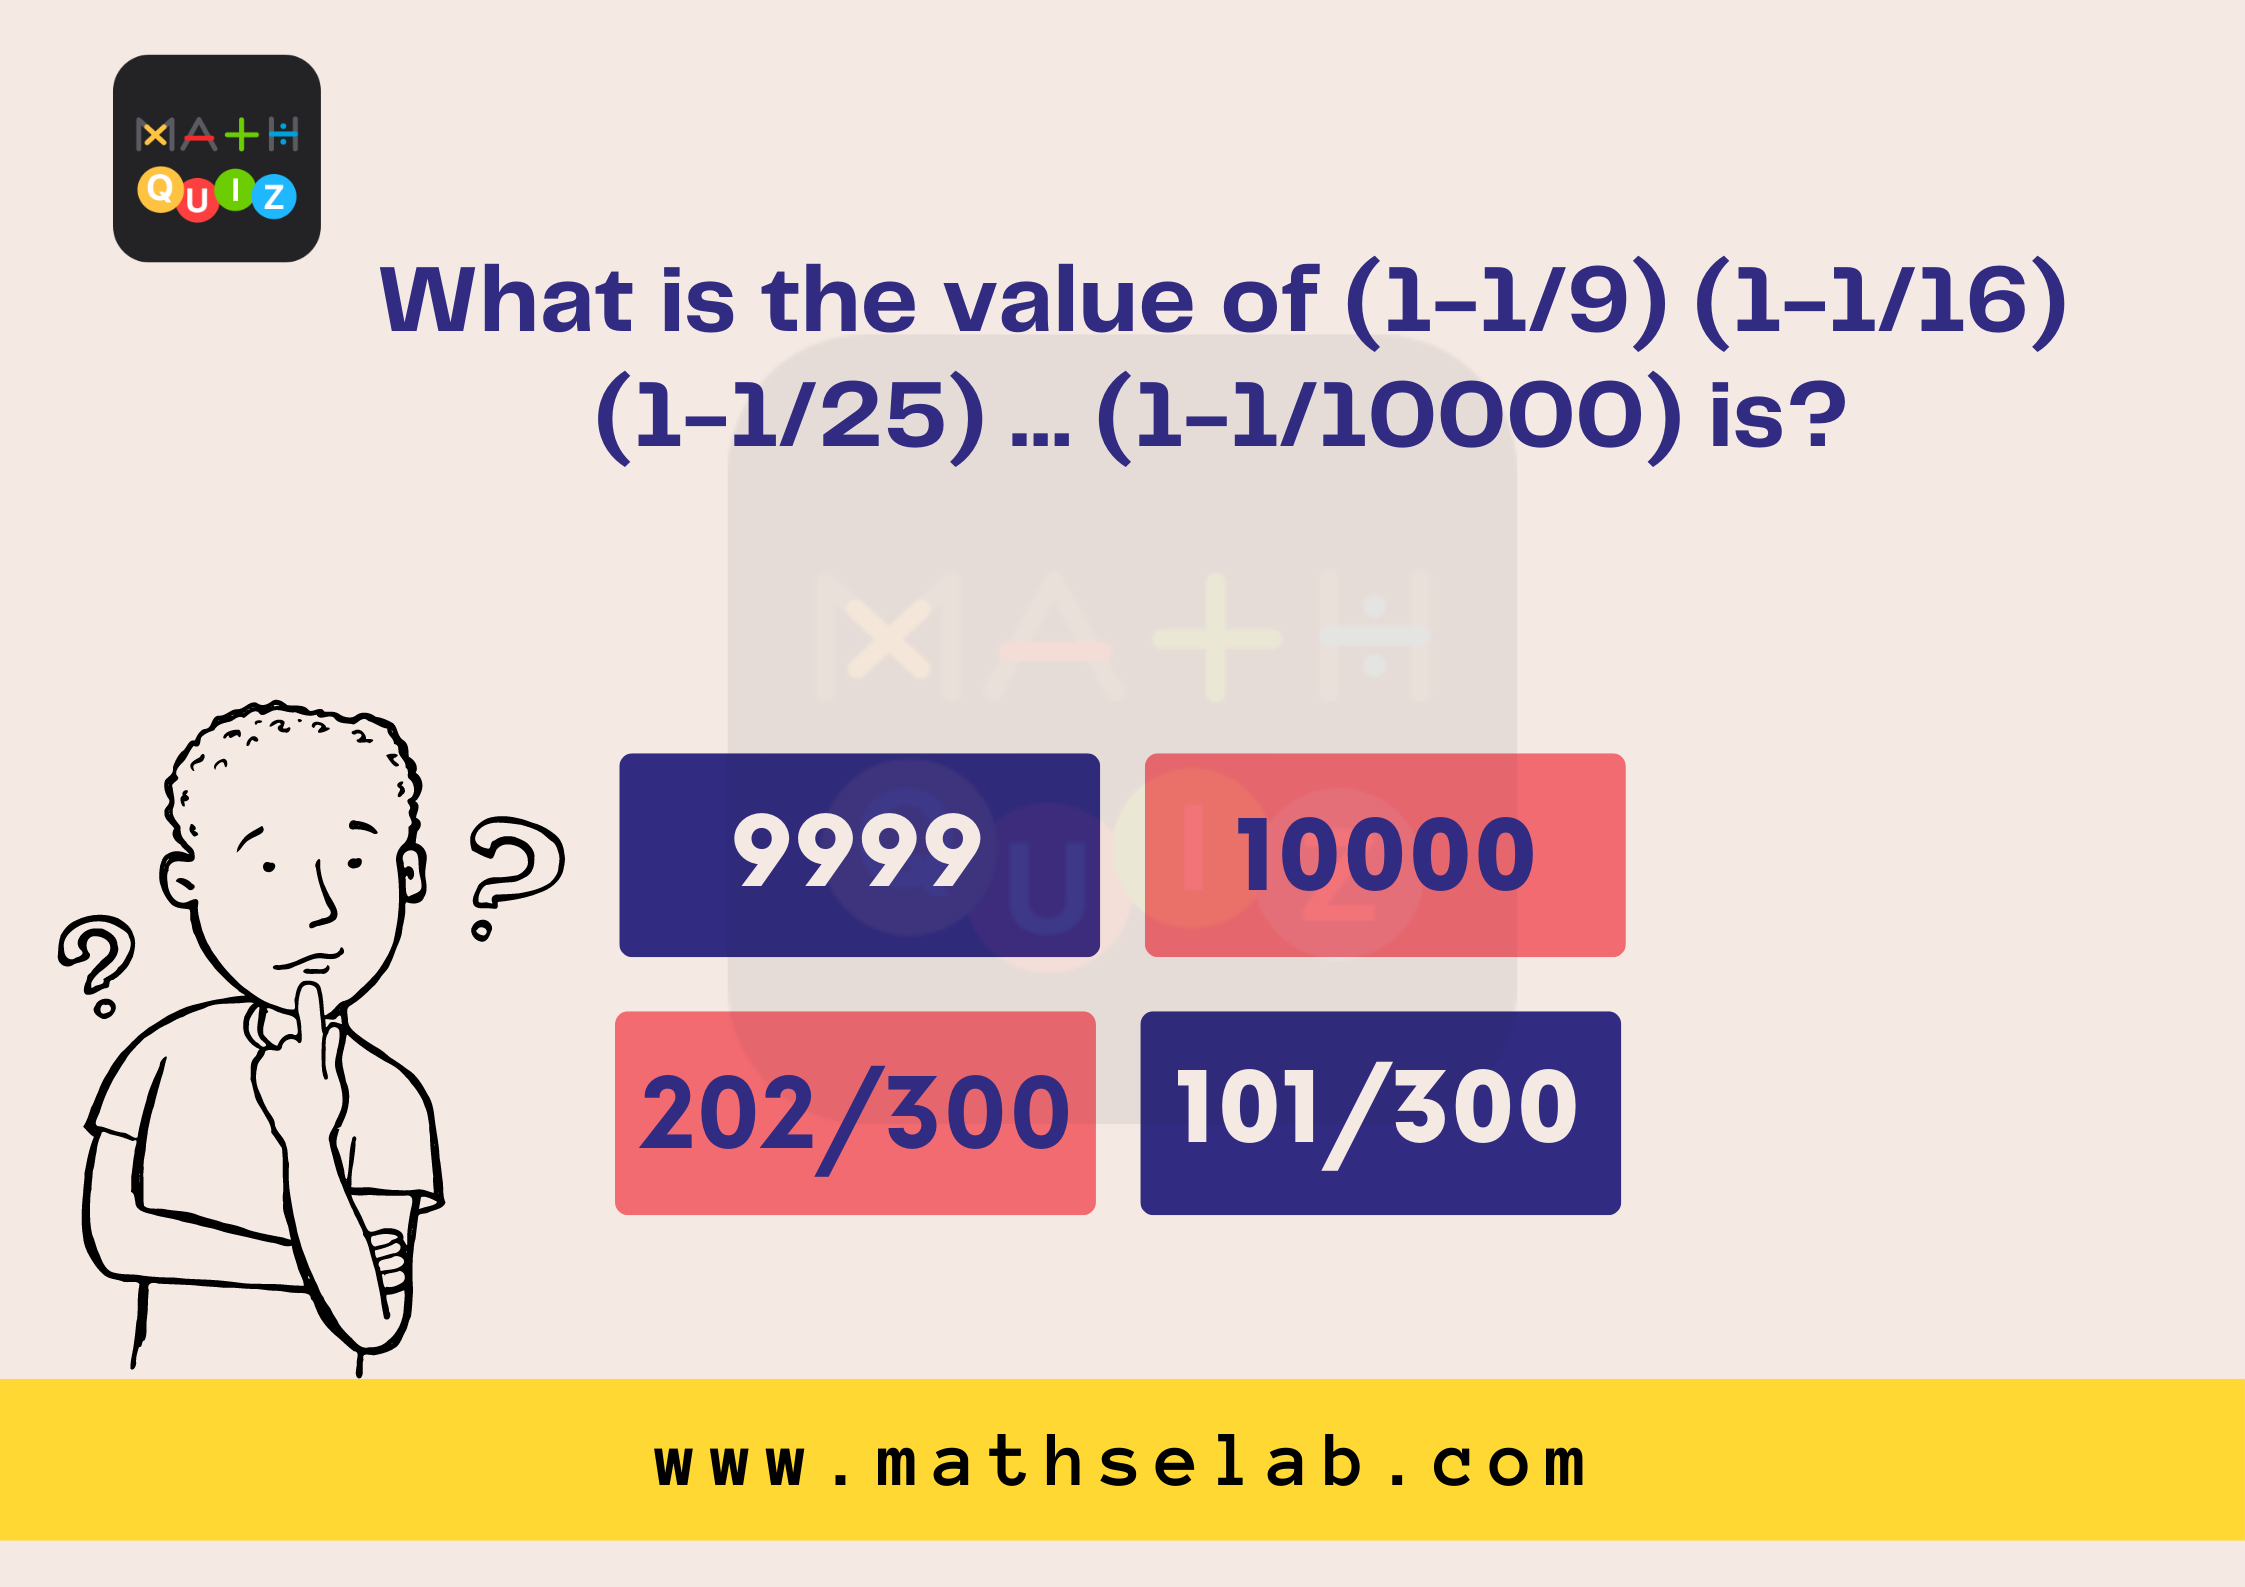 What is the value of (1-1/9) (1-1/16) (1-1/25) … (1-1/10000) is?